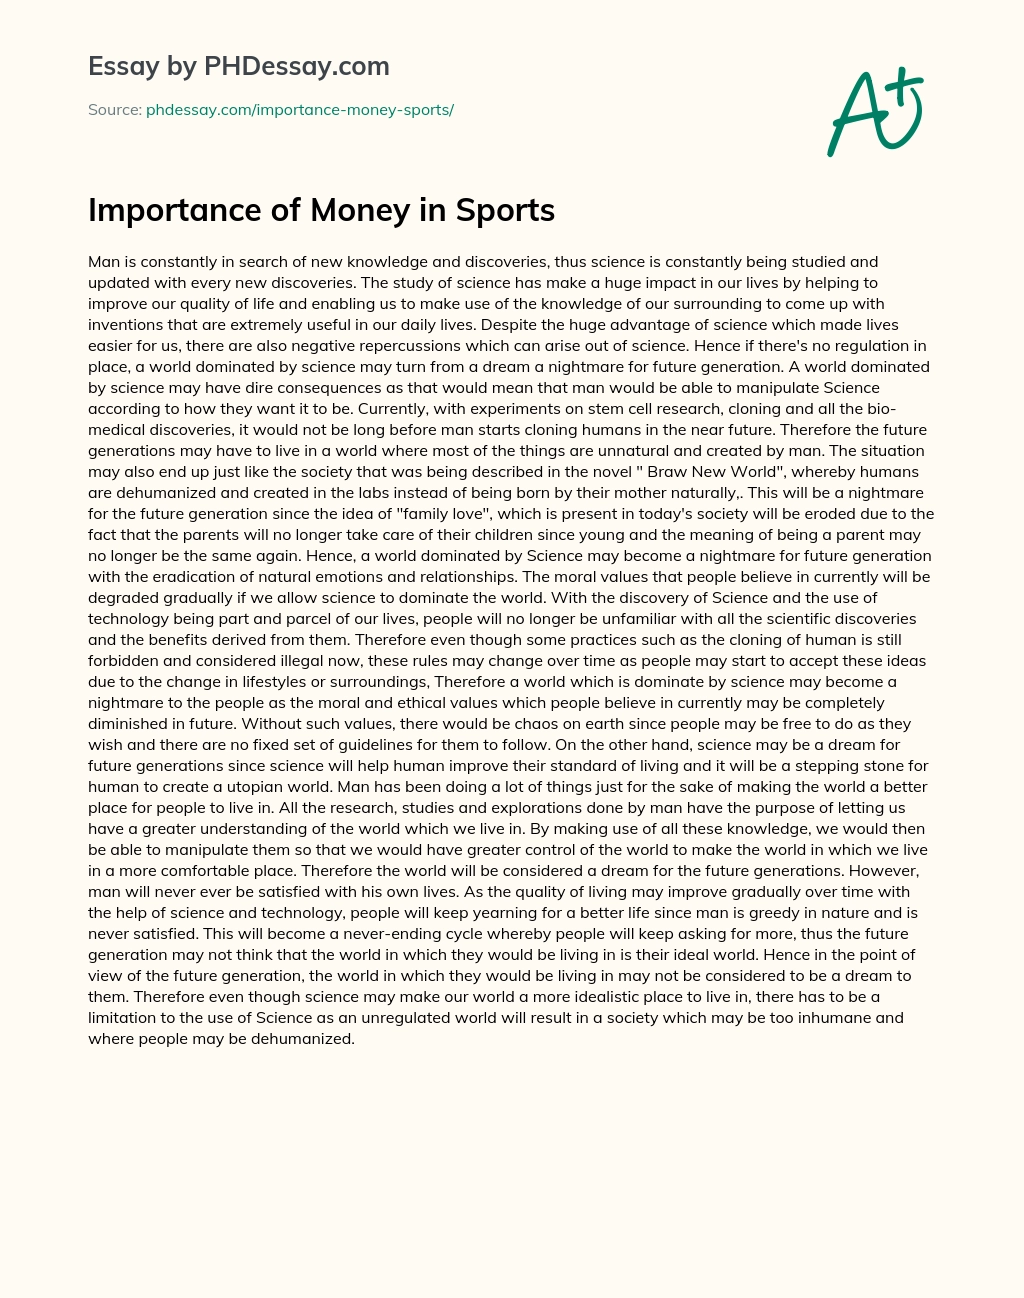 Importance of Money in Sports essay